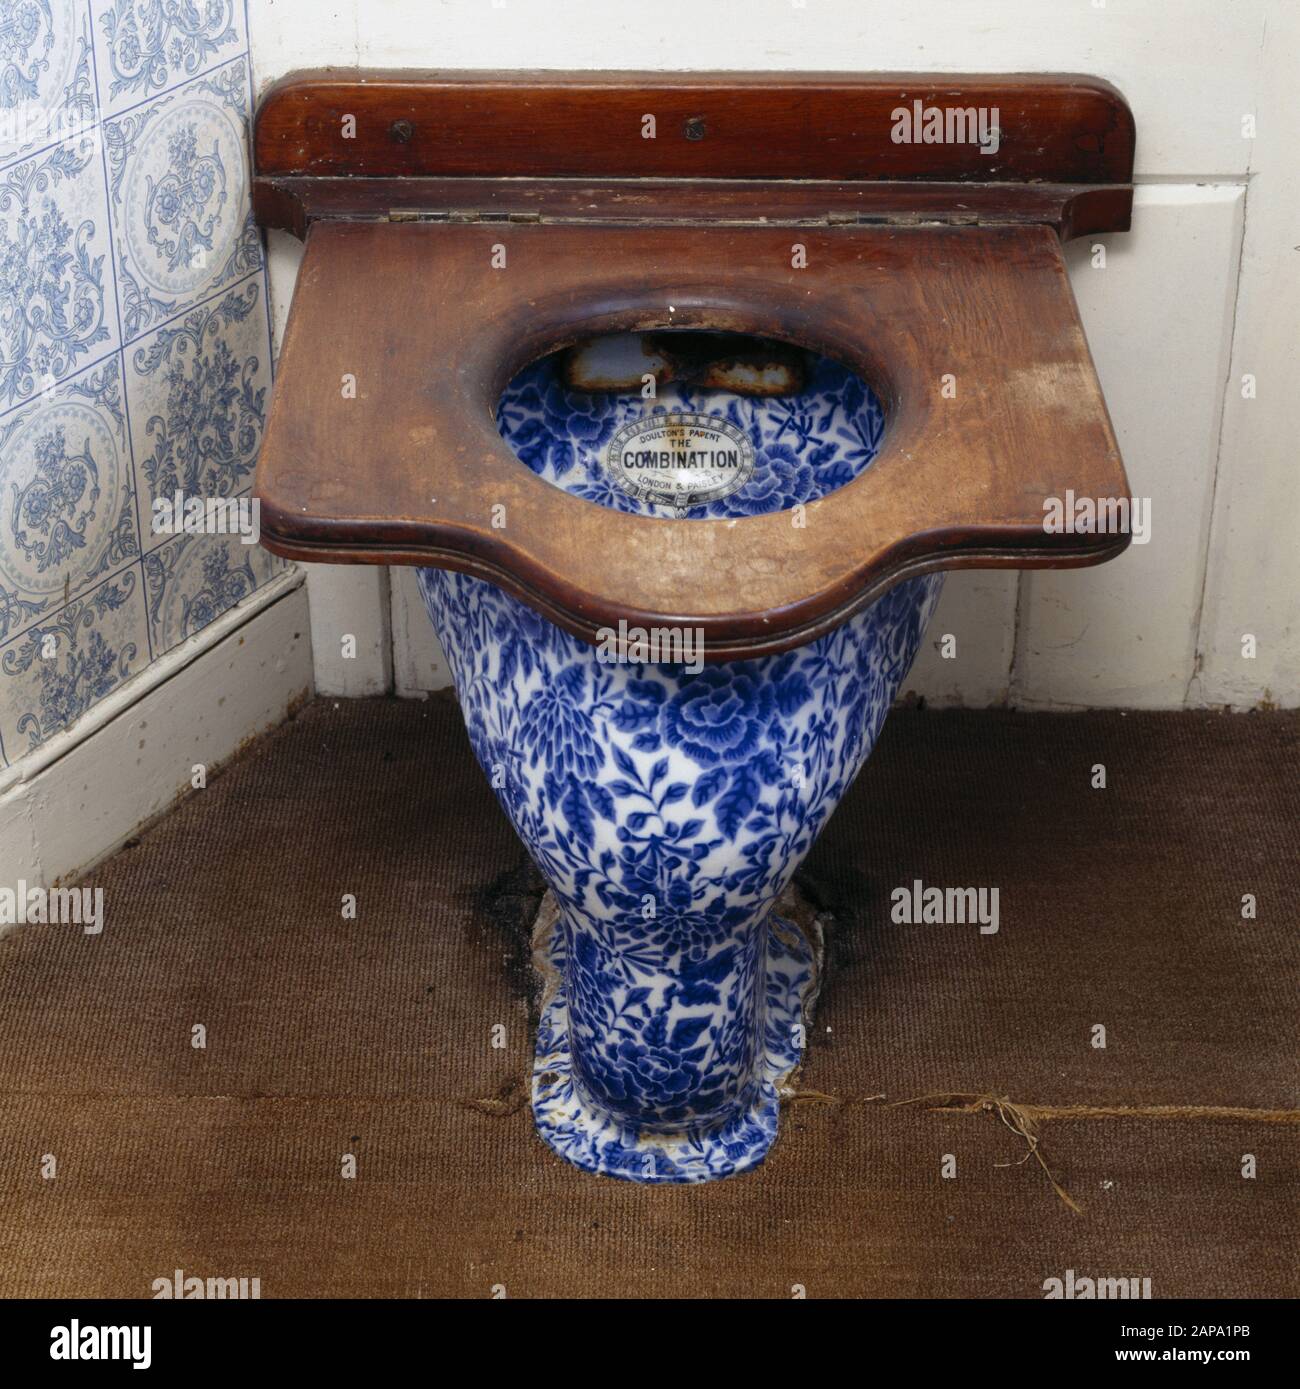 A blue and white floral patterned lavatory - The Combination by Doulton. A large wooden seat covers the bowl. Stock Photo